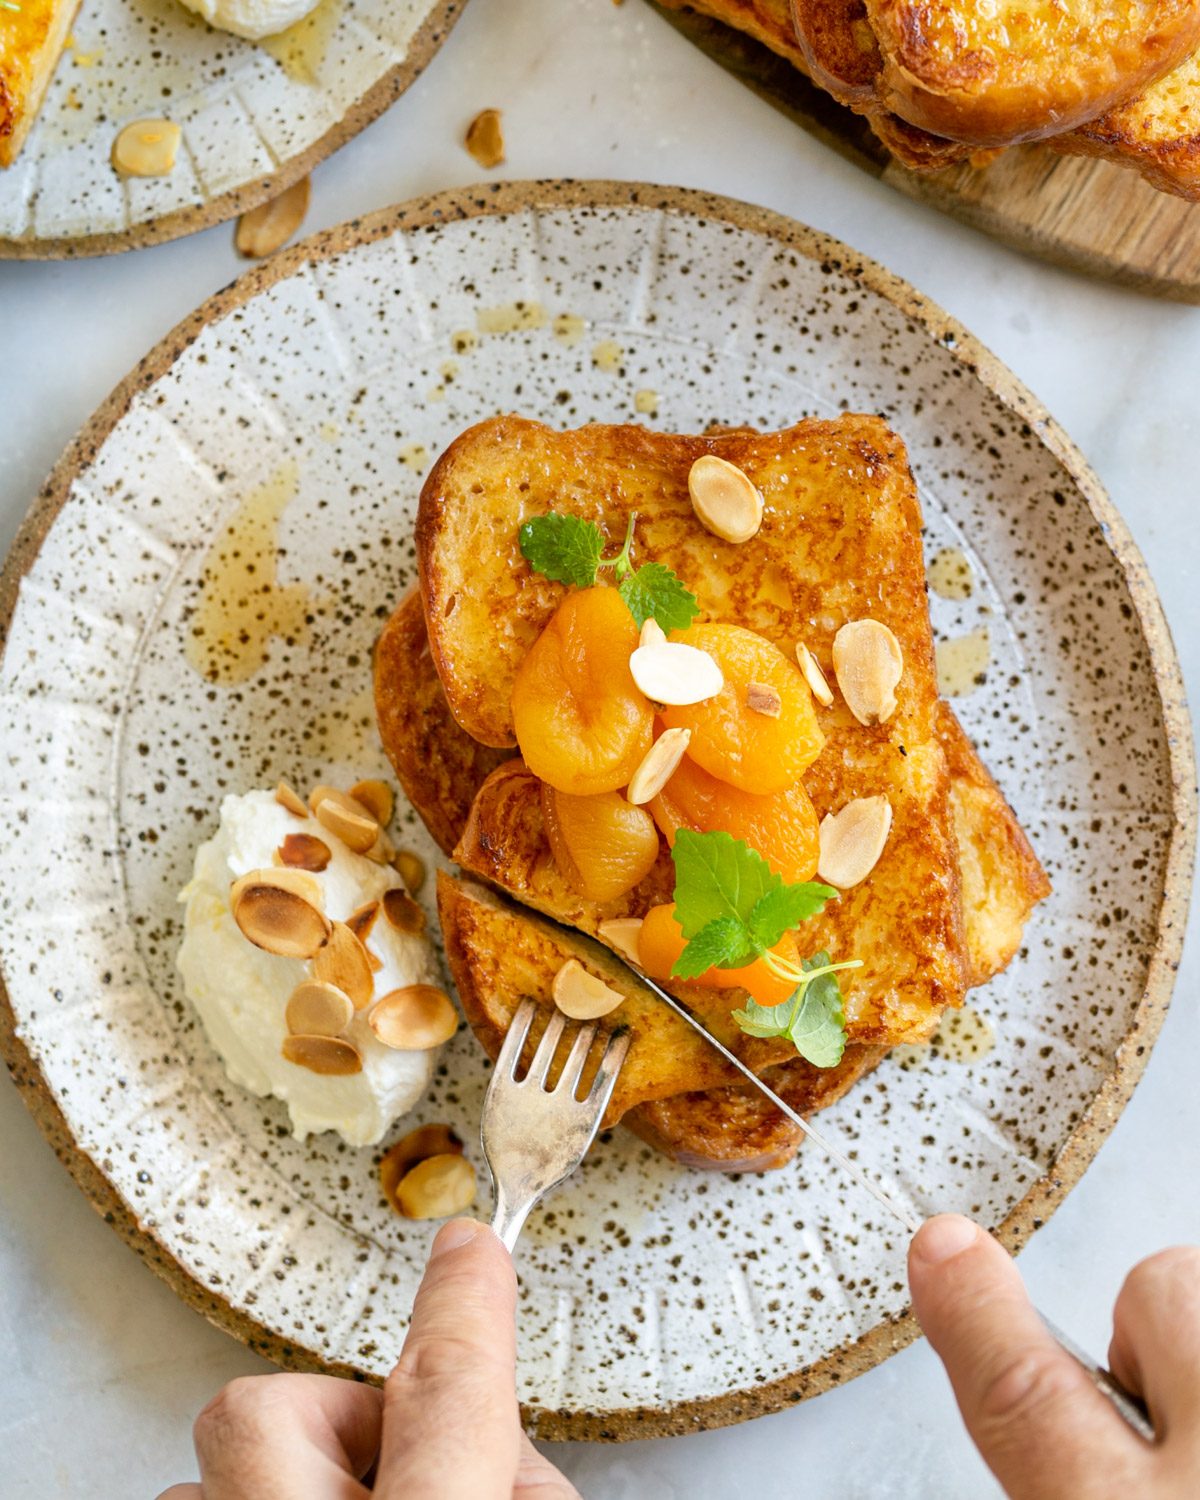 Easy French Toast Recipe with Apricots in Amaretto Syrup